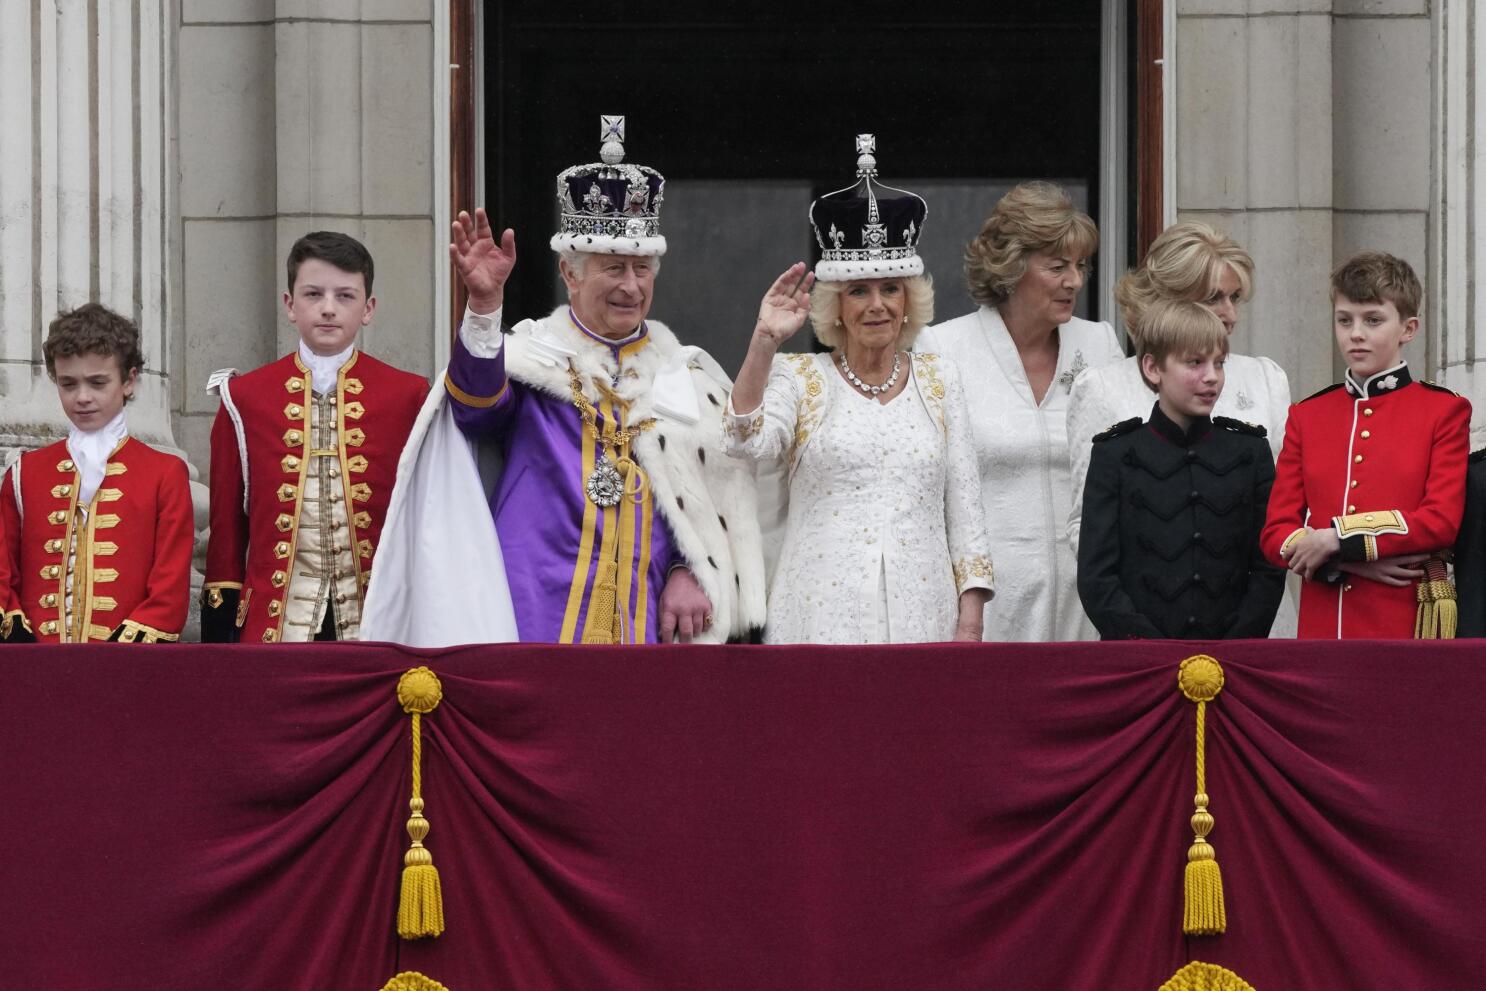 King Charles III and the Queen Consort arrive for their visit to